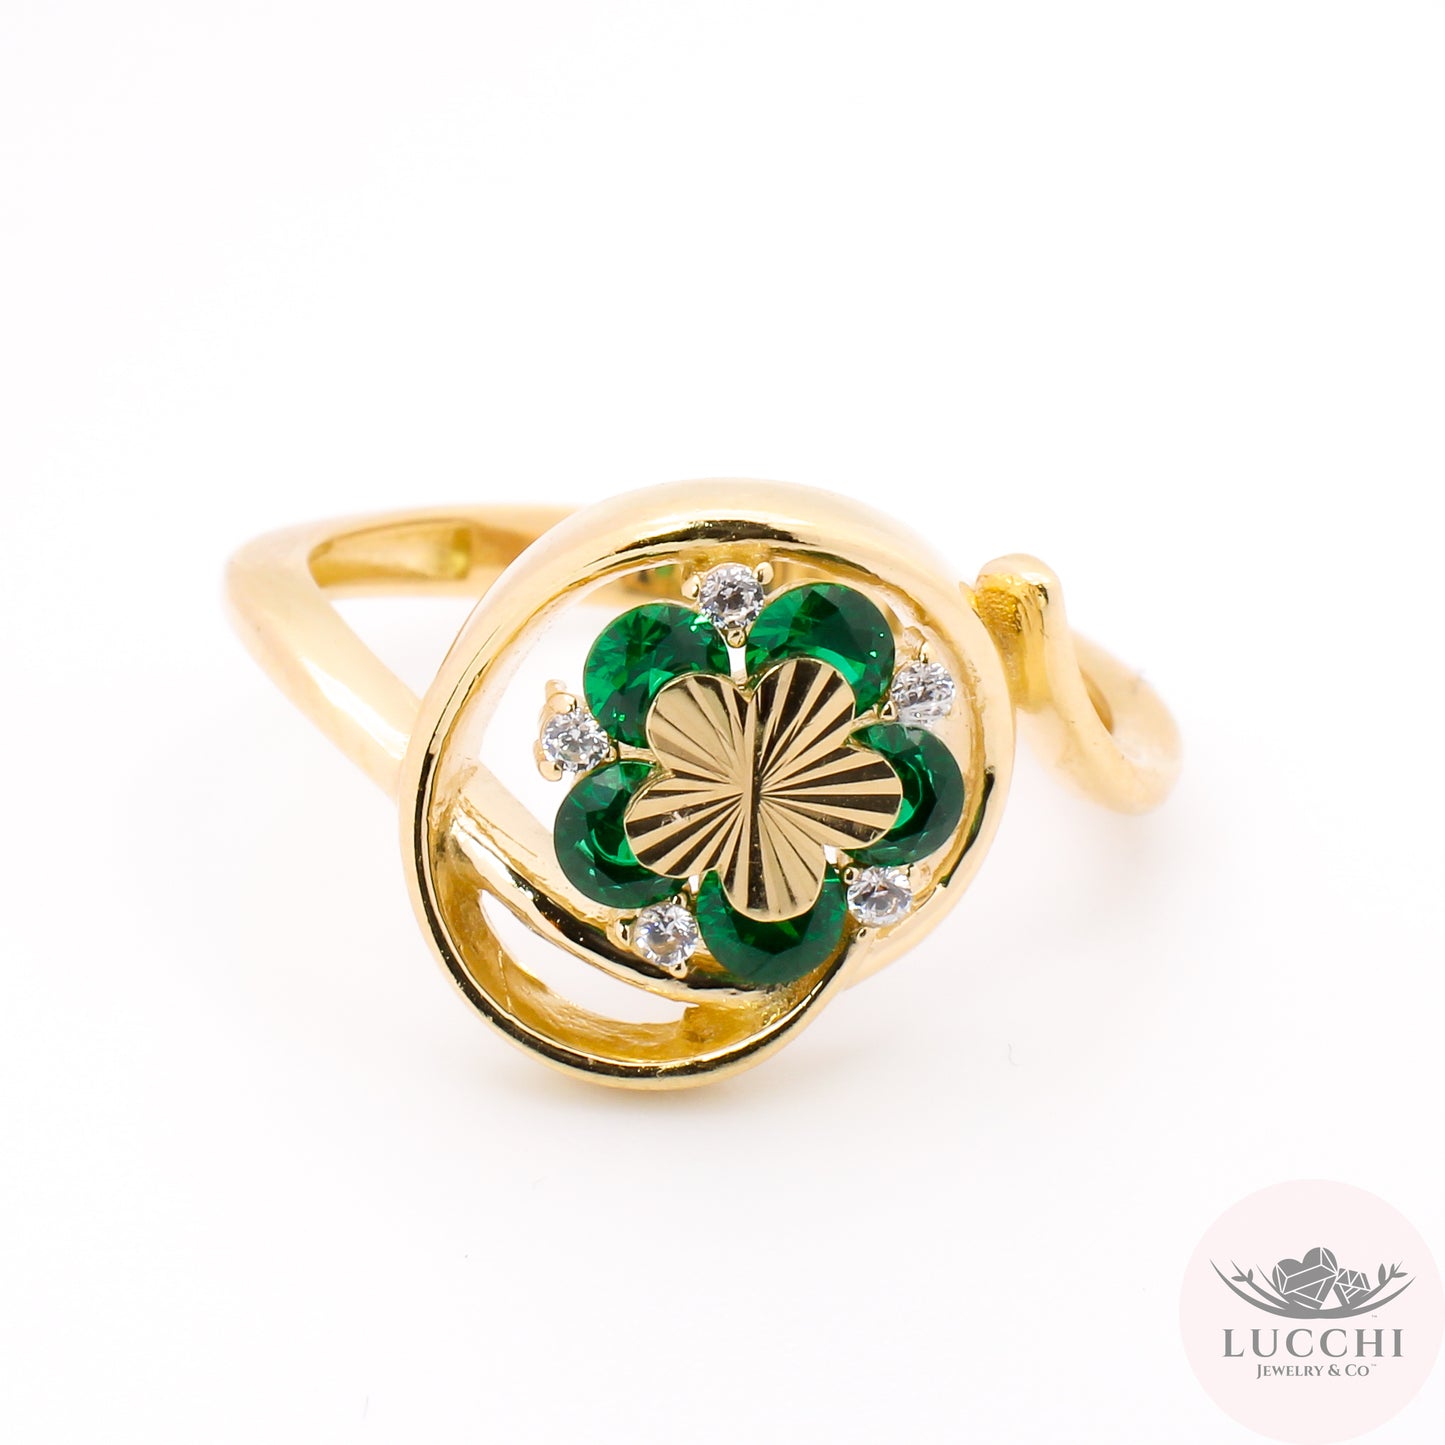 Statement x Floral x Bypass x Halo Ring - Emerald Green - 14k